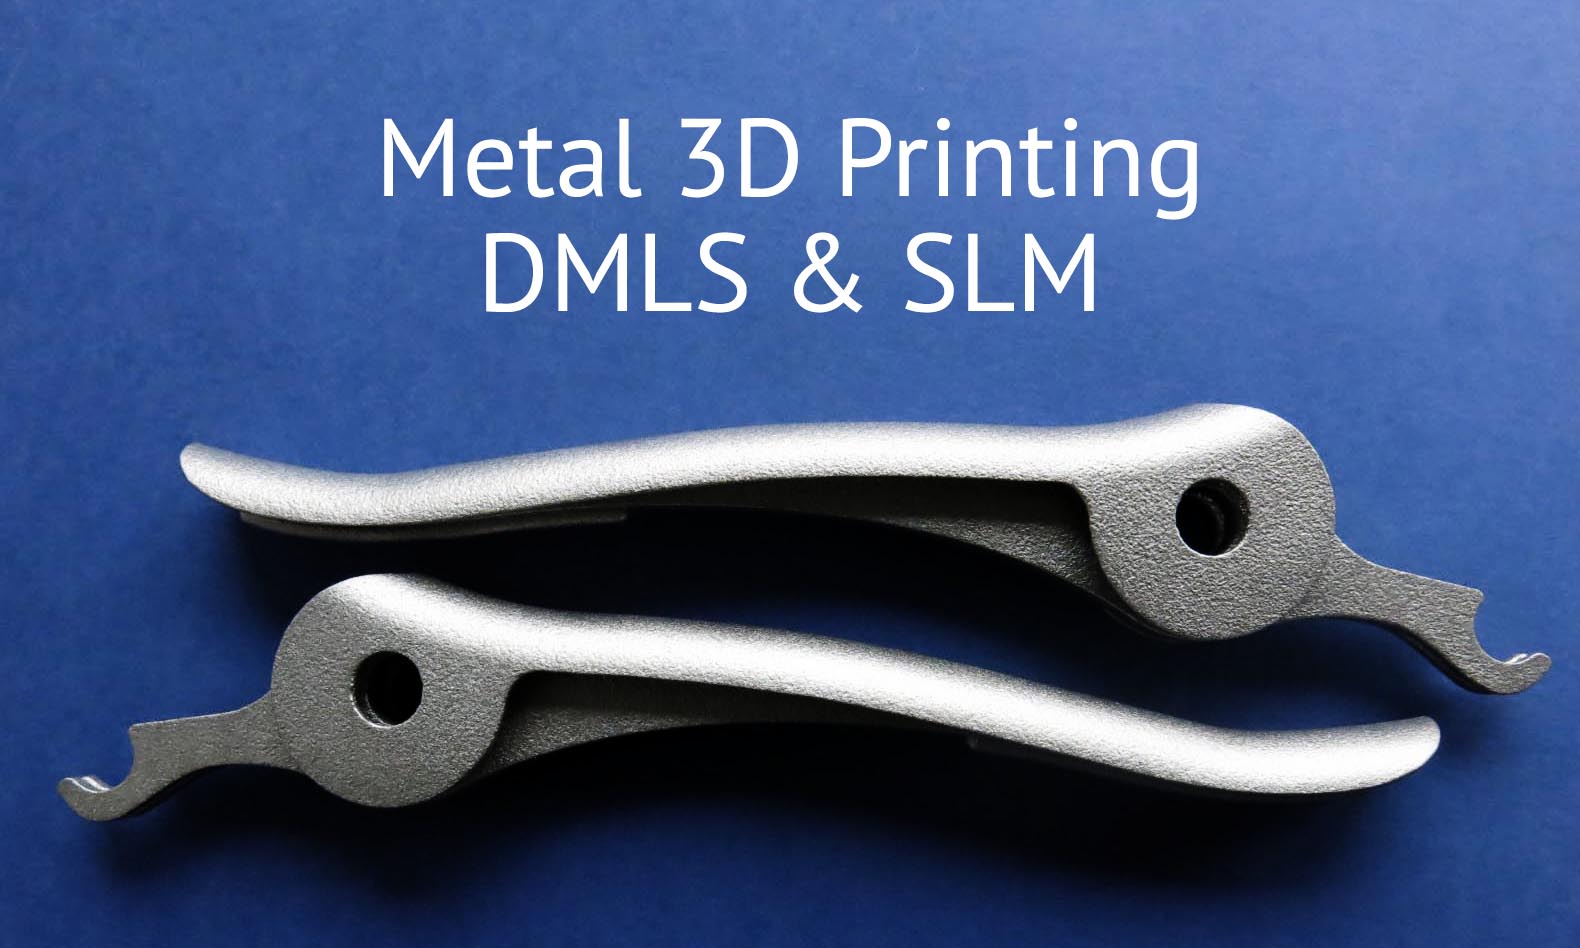 3D Printing Aluminium, Stainless Steel, and Titanium with the DMLS and SLM technologies | Sculpteo Blog